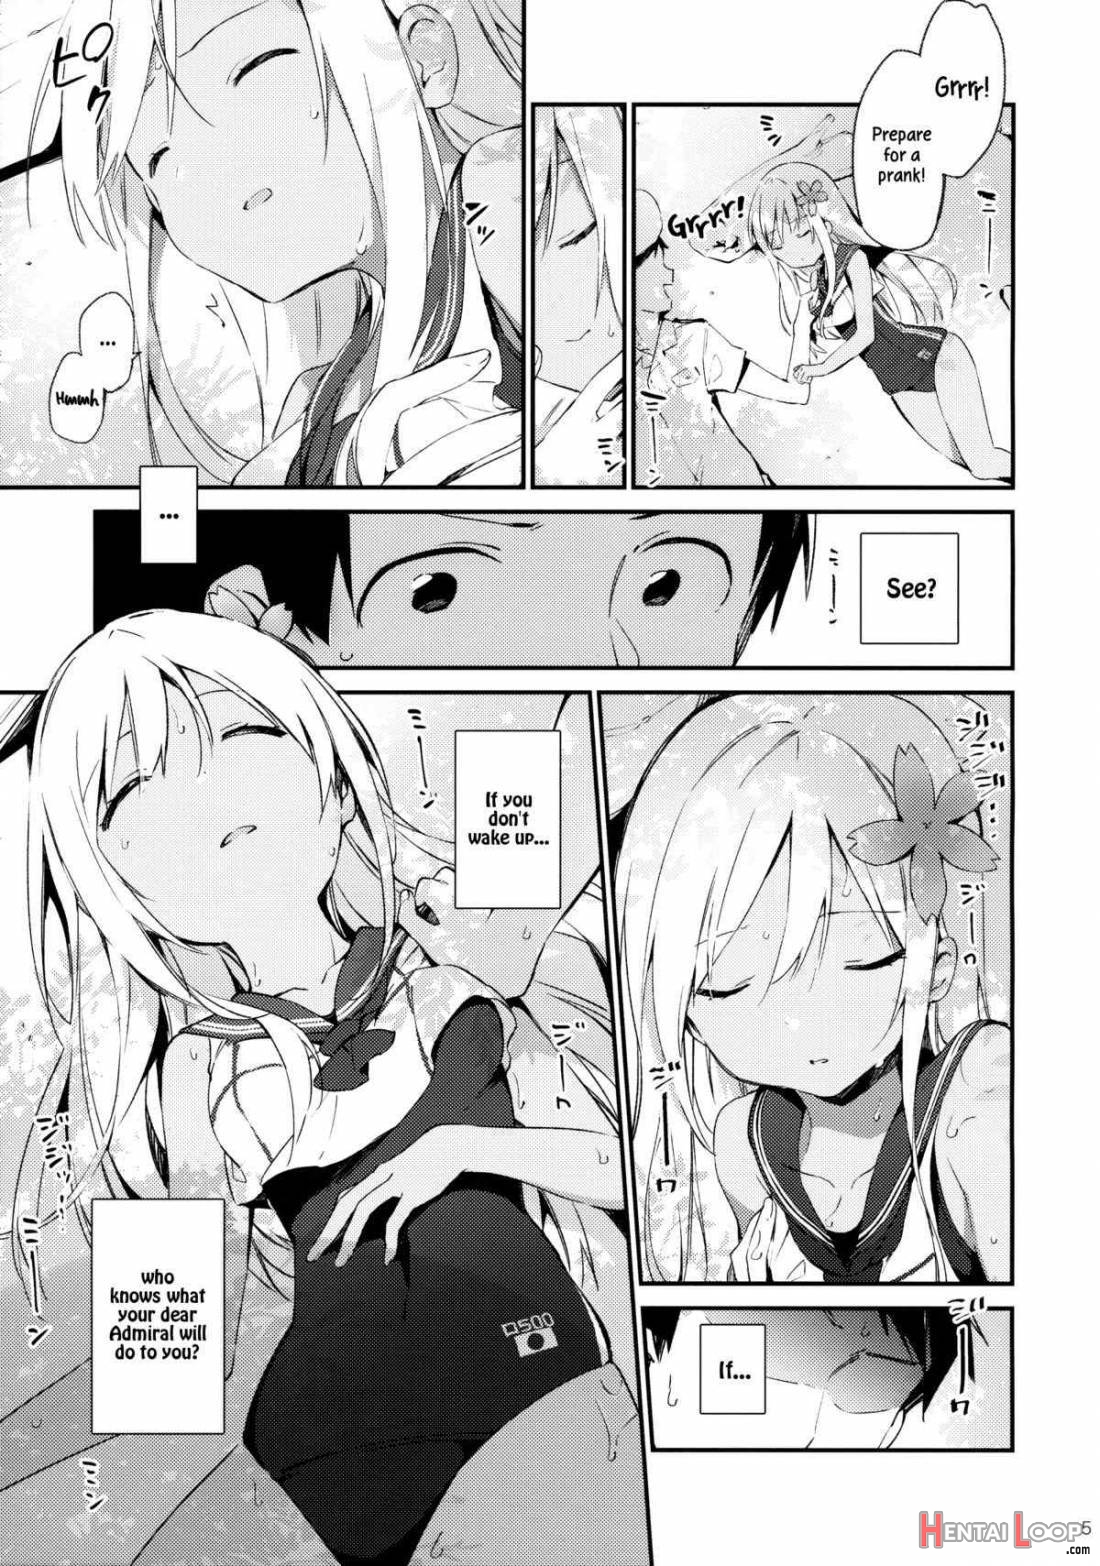 Ro-chan To Issho! page 5